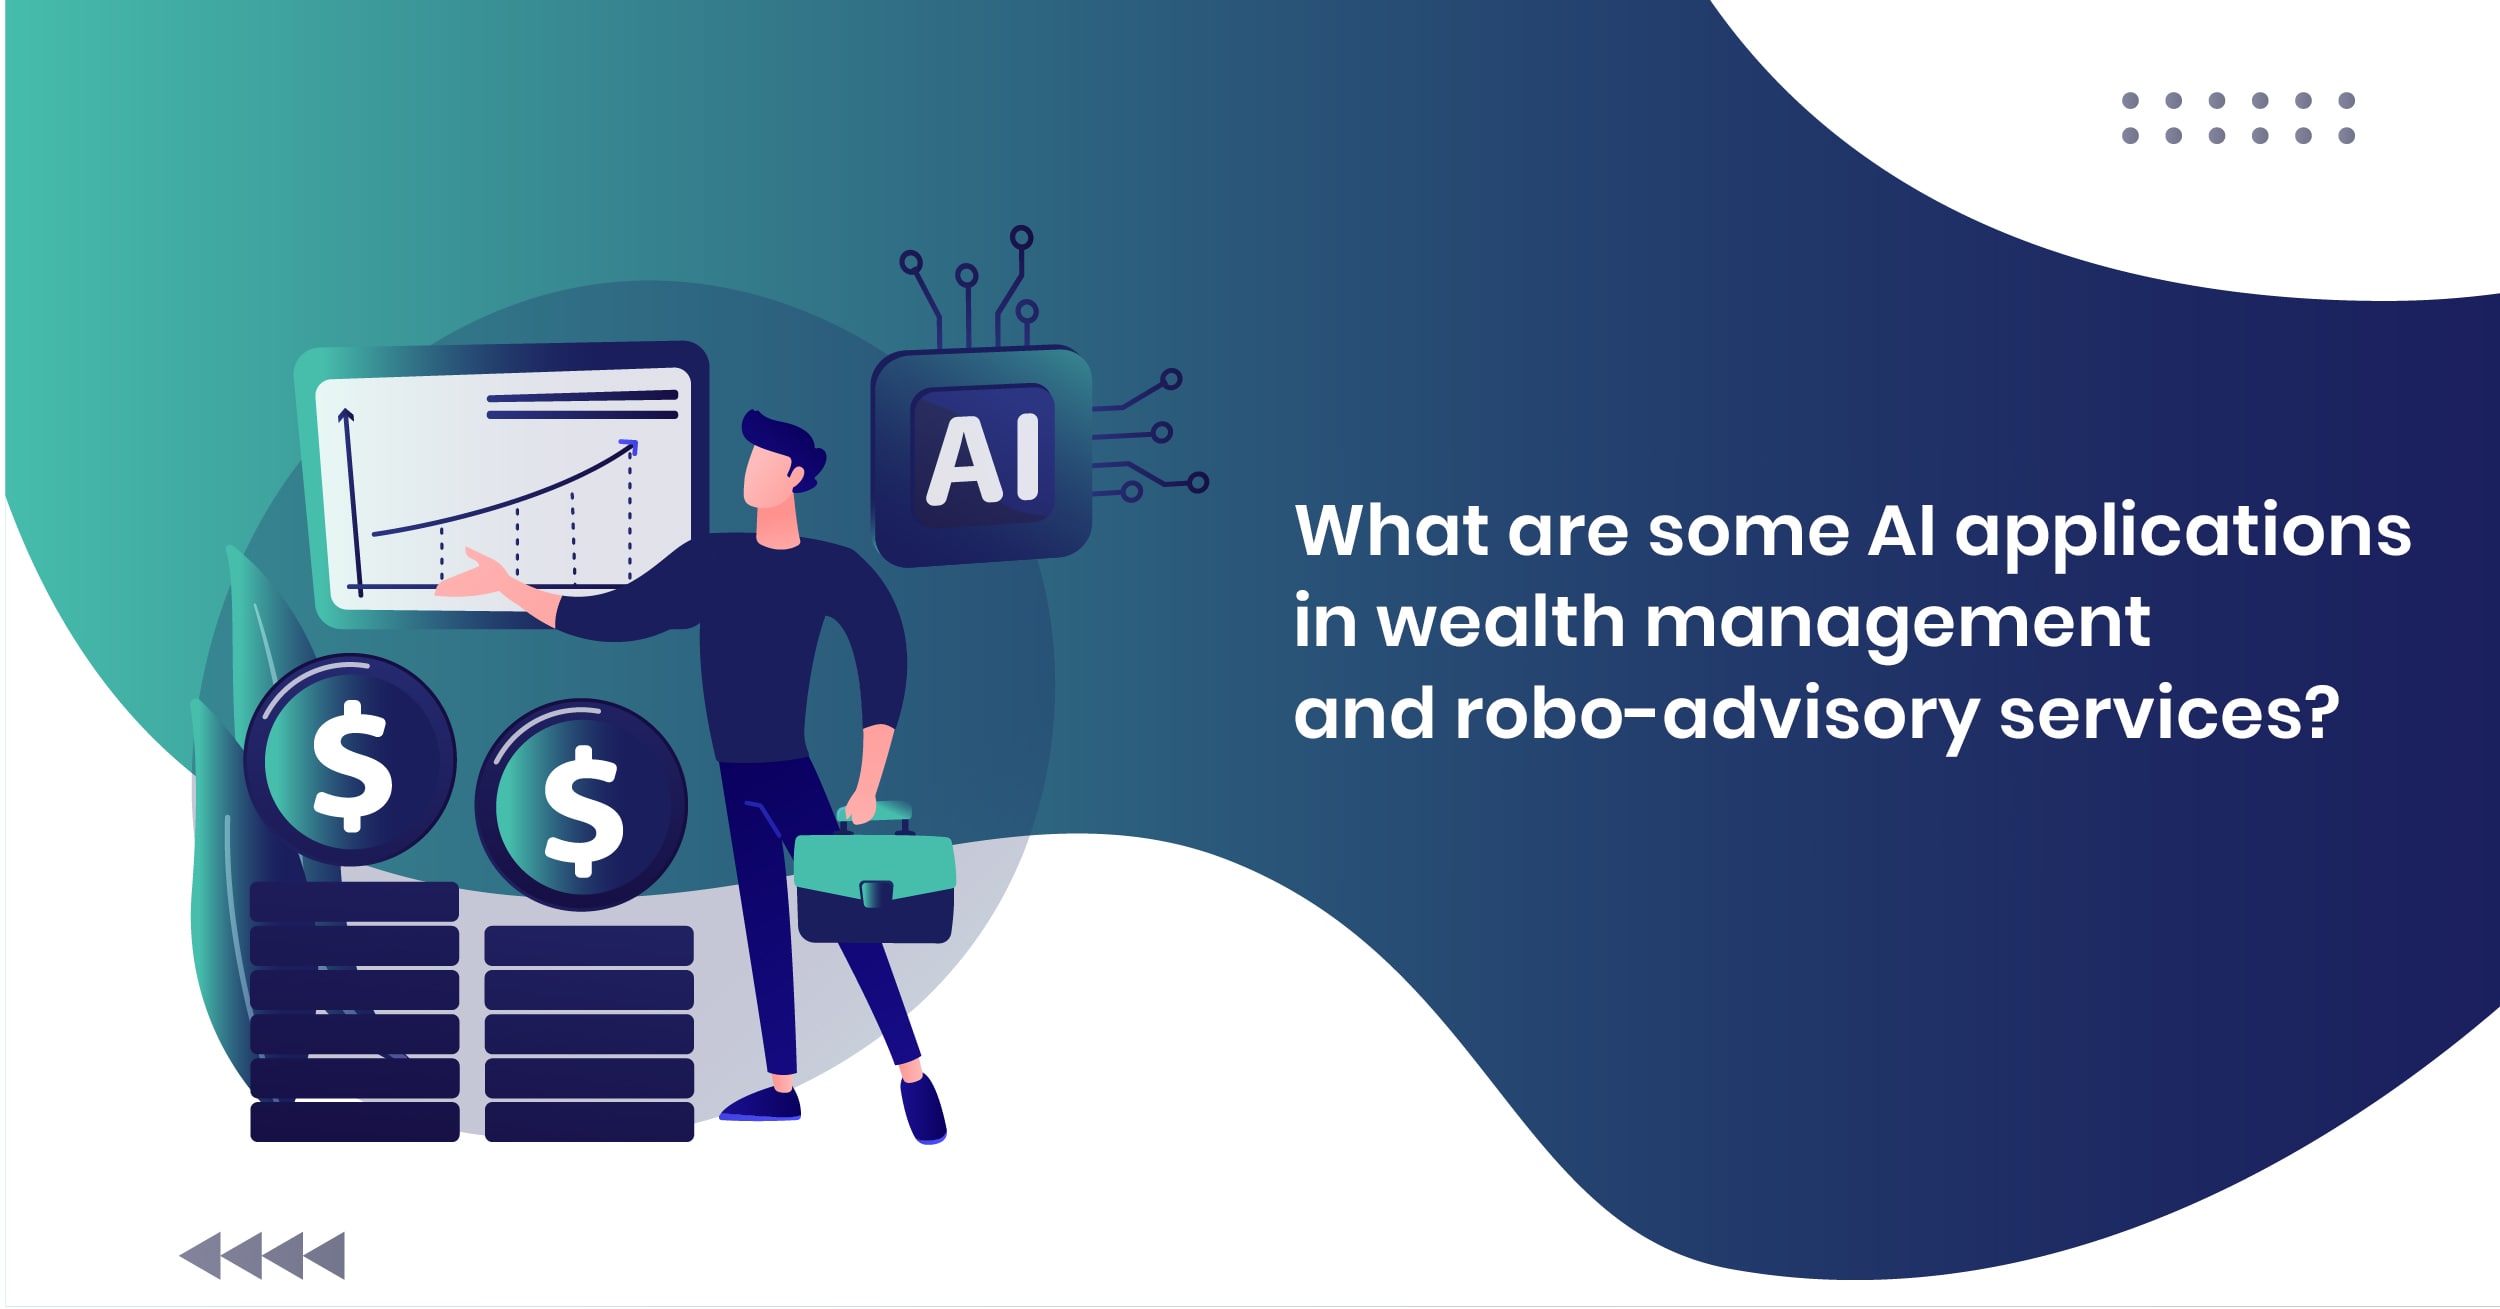 What are some AI applications in wealth management and robo-advisory services